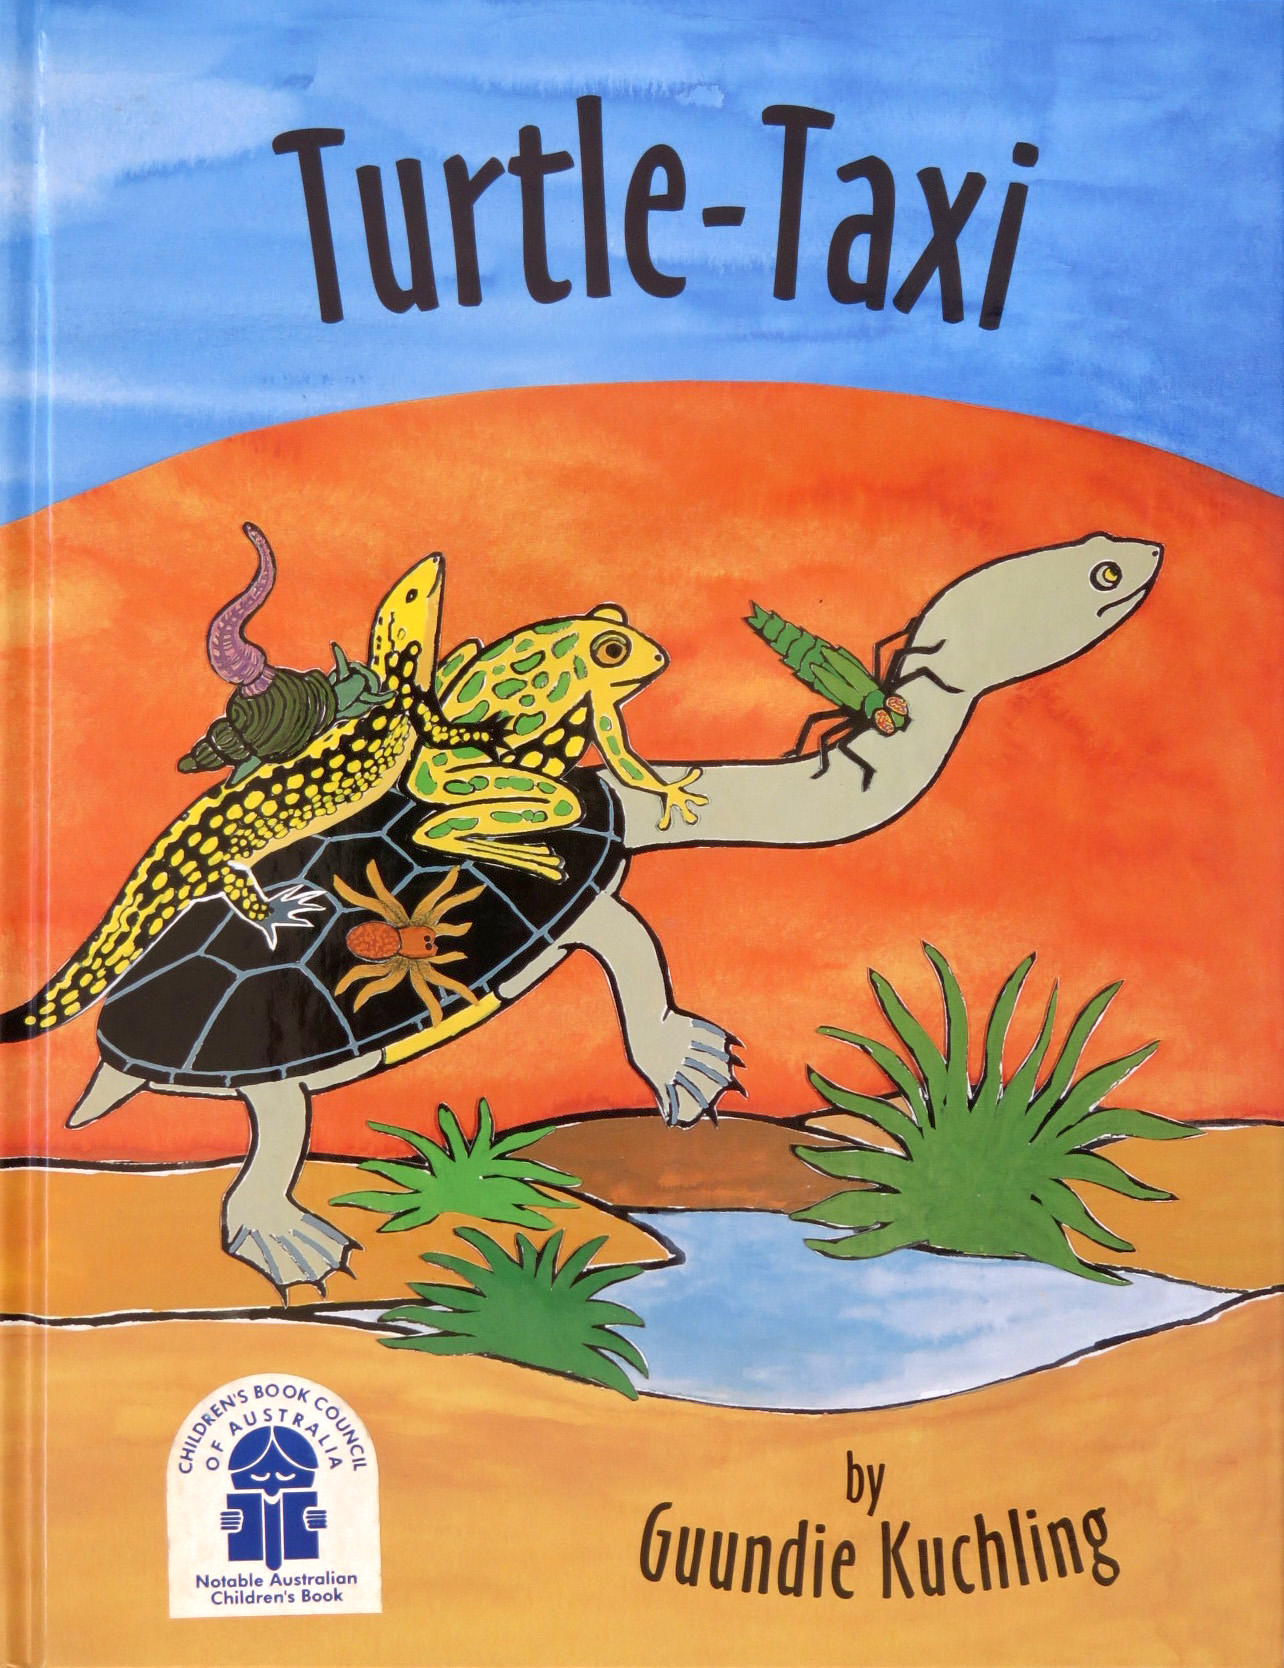 Turtle-Taxi by Guundie Kuchling, Artist and Writer